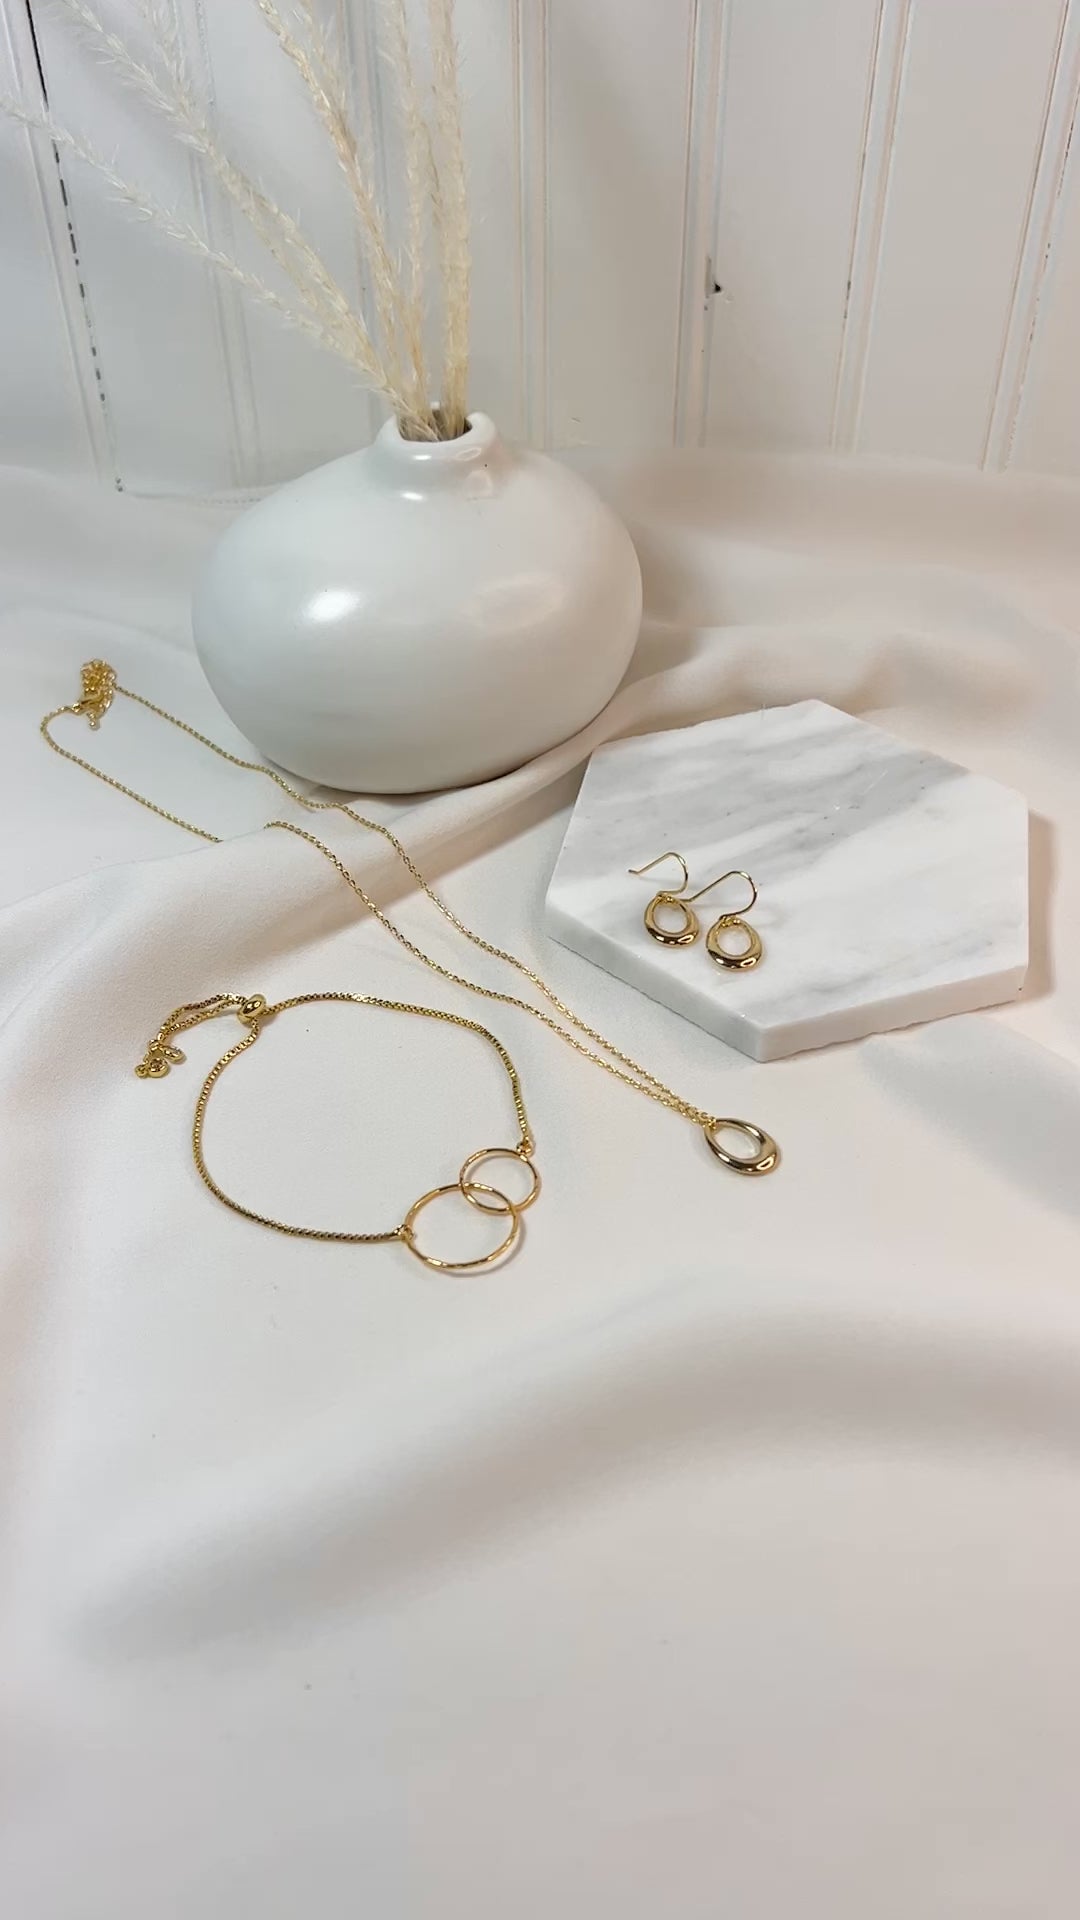 Video featuring Reminded Designs Mini Spring Jewelry Bundle featuring a simple gold necklace with matching earrings and an adjustable bolo style bracelet